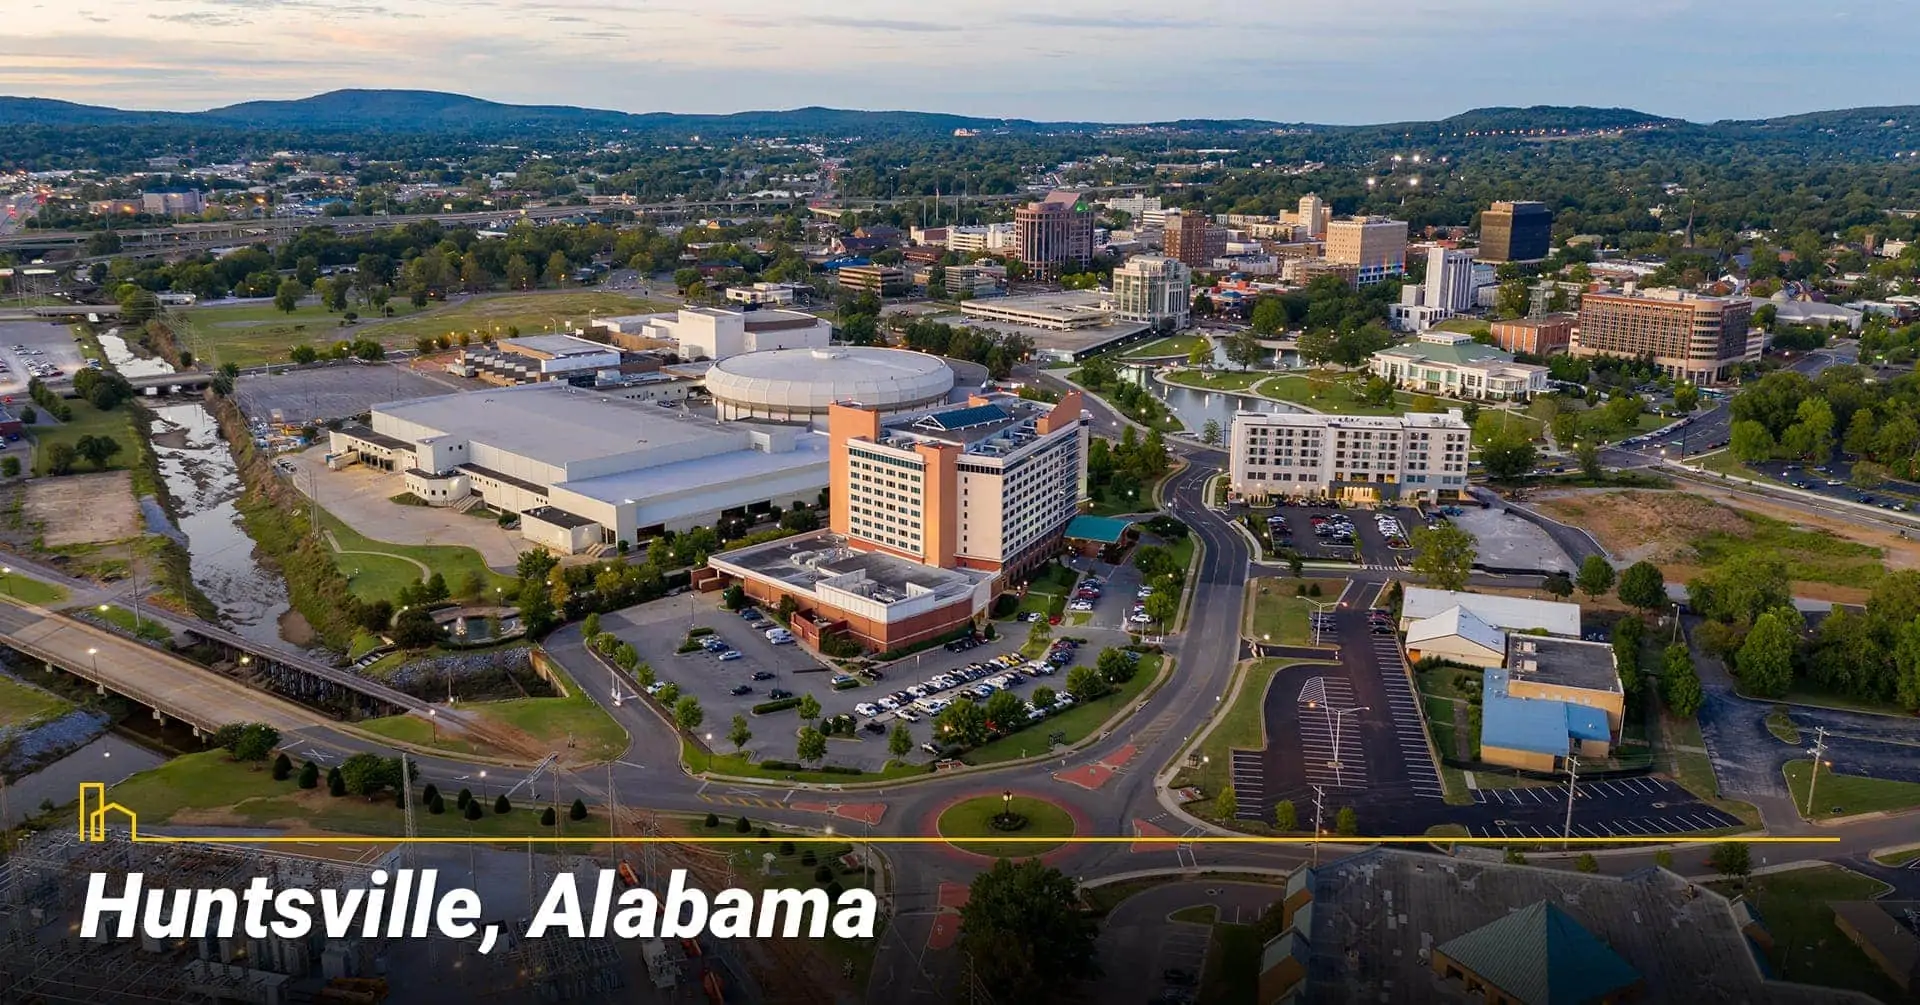 Huntsville, Alabama an affordable city to retire